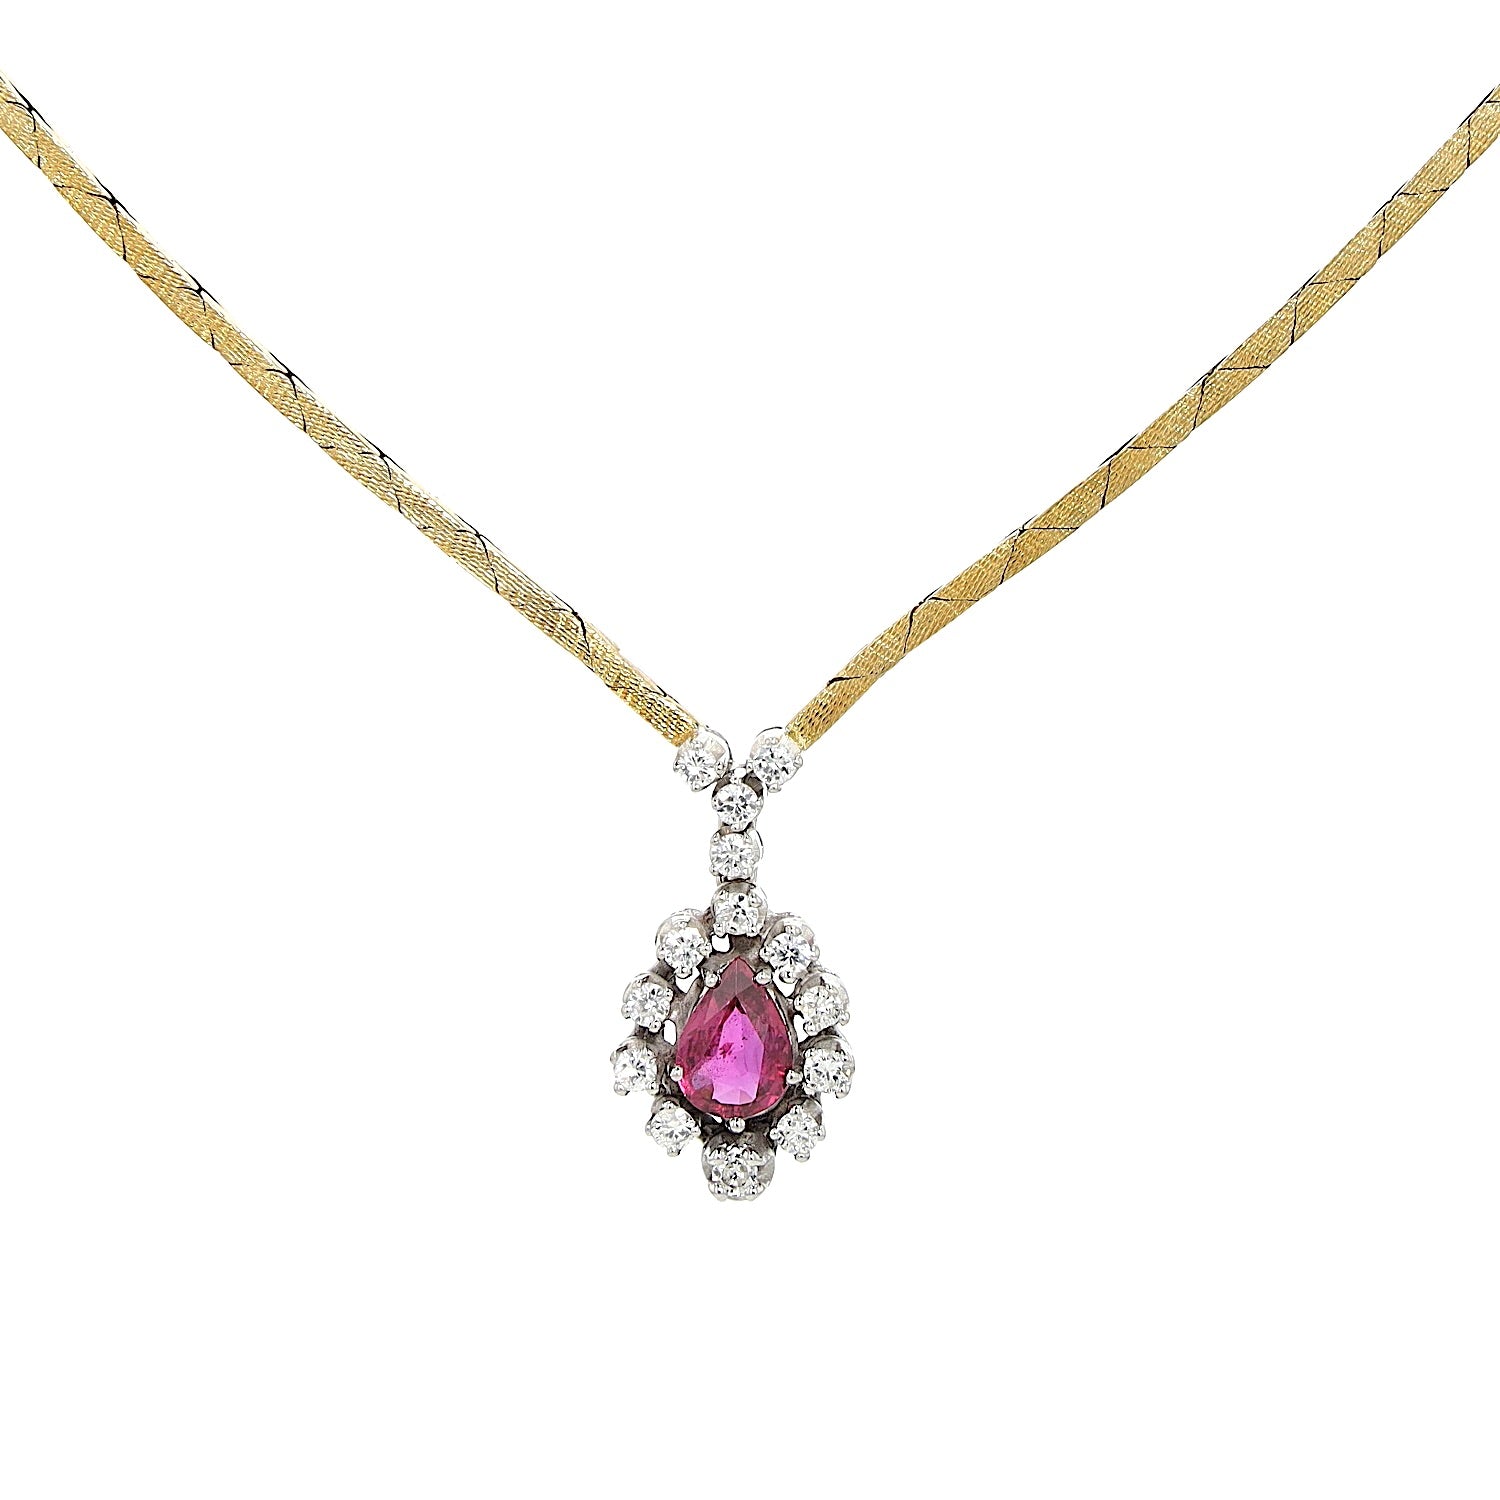 Necklace in 585 gold bicolor with a Ruby and brilliants